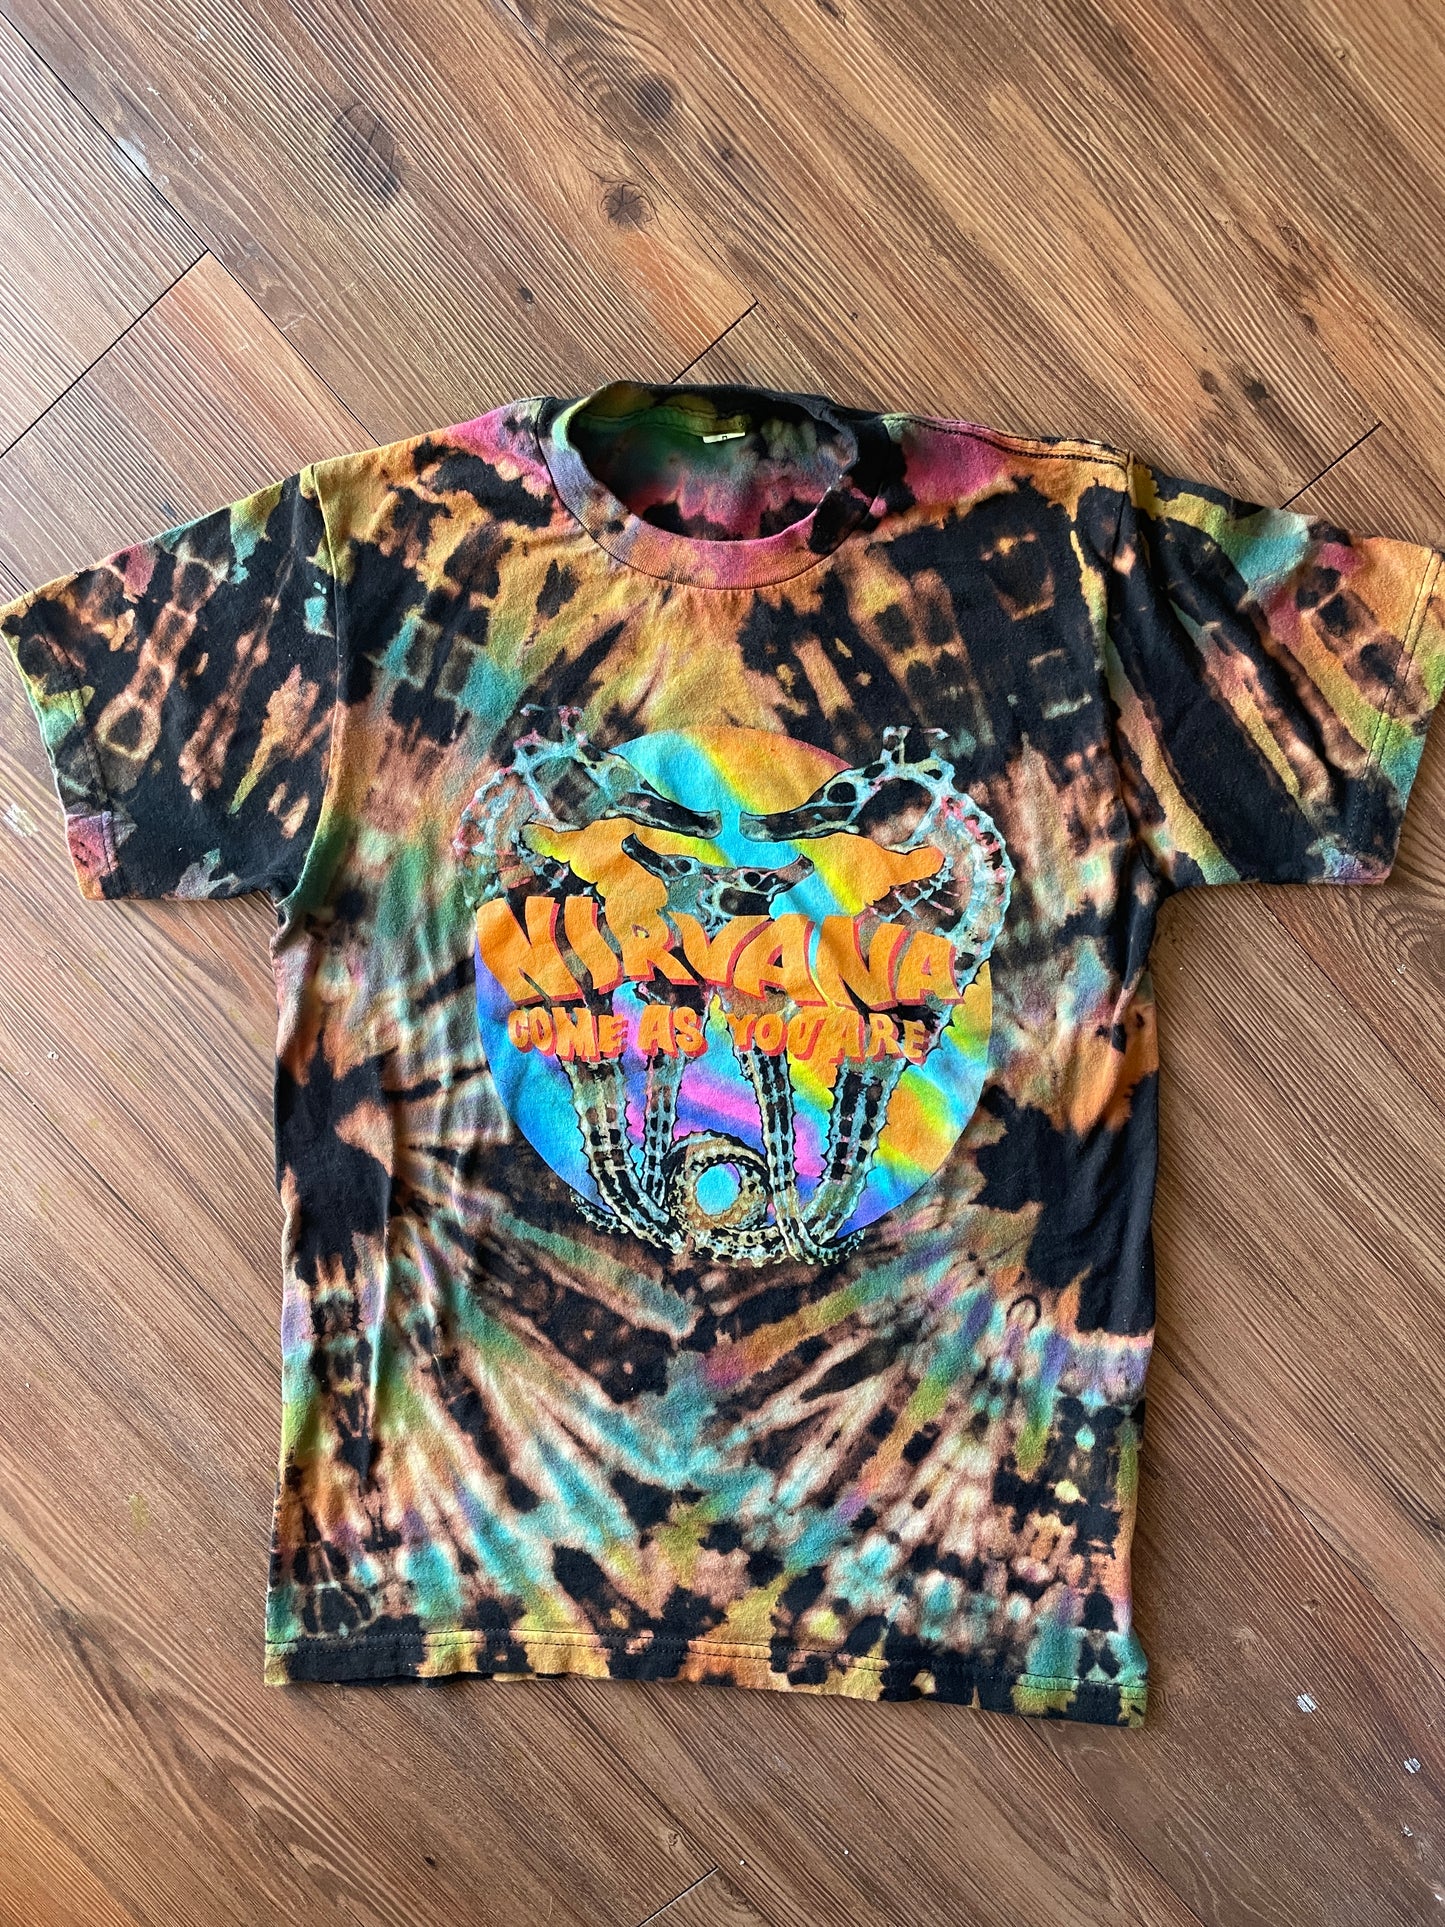 MEDIUM Men’s Nirvana Come As You Are Handmade Tie Dye T-Shirt | One-Of-a-Kind Pastel Rainbow and Black Short Sleeve